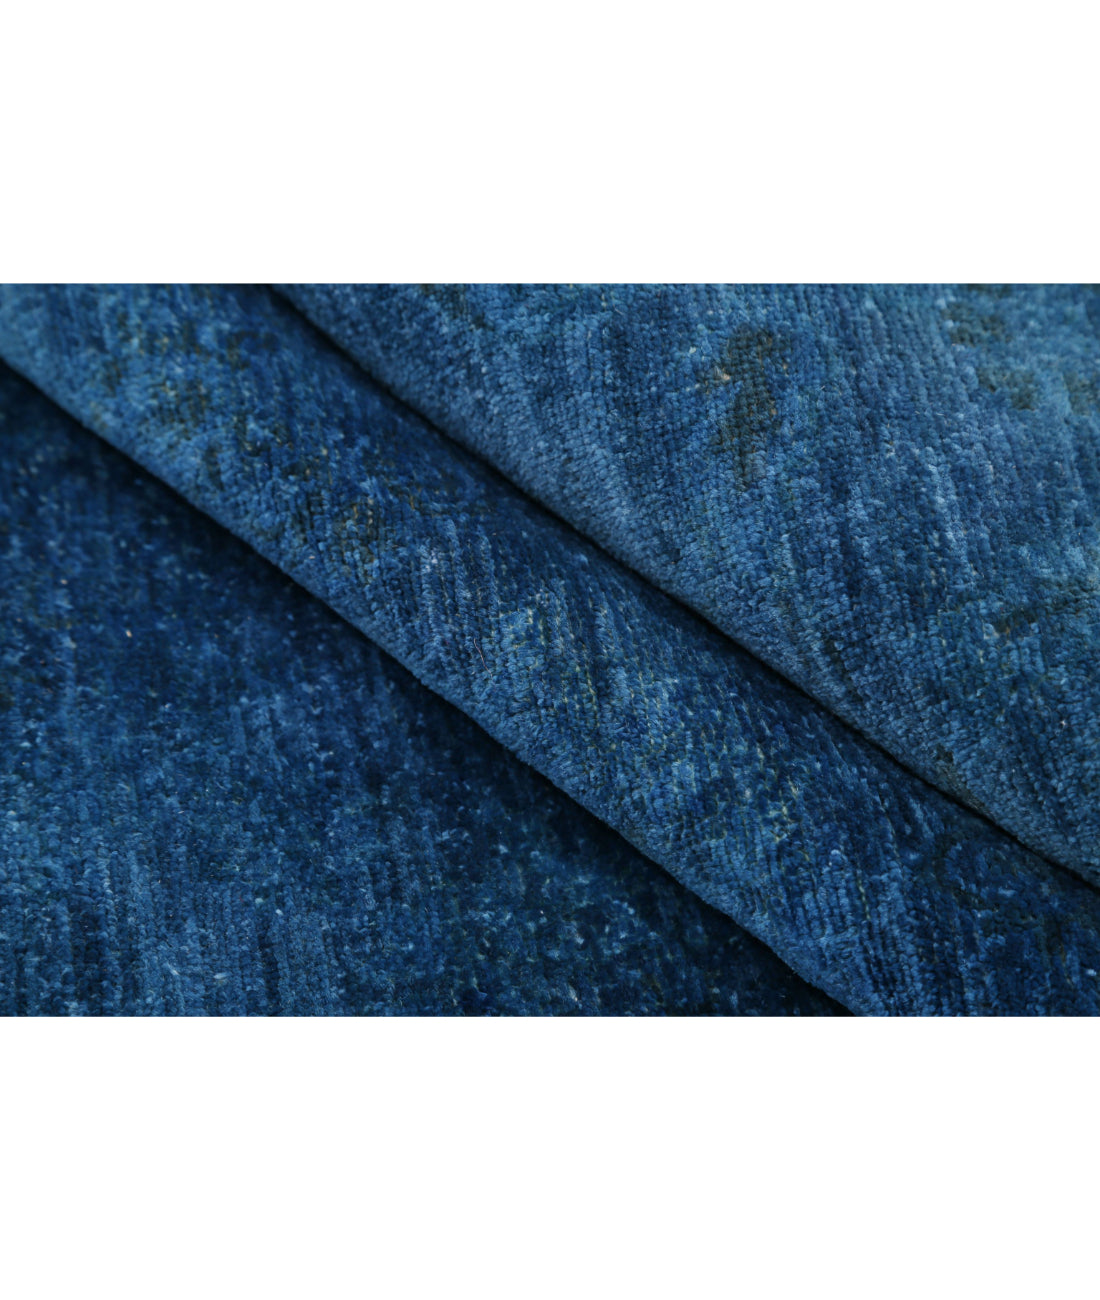 Hand Knotted Overdye Wool Rug - 5'9'' x 11'9'' 5'9'' x 11'9'' (173 X 353) / Blue / Blue